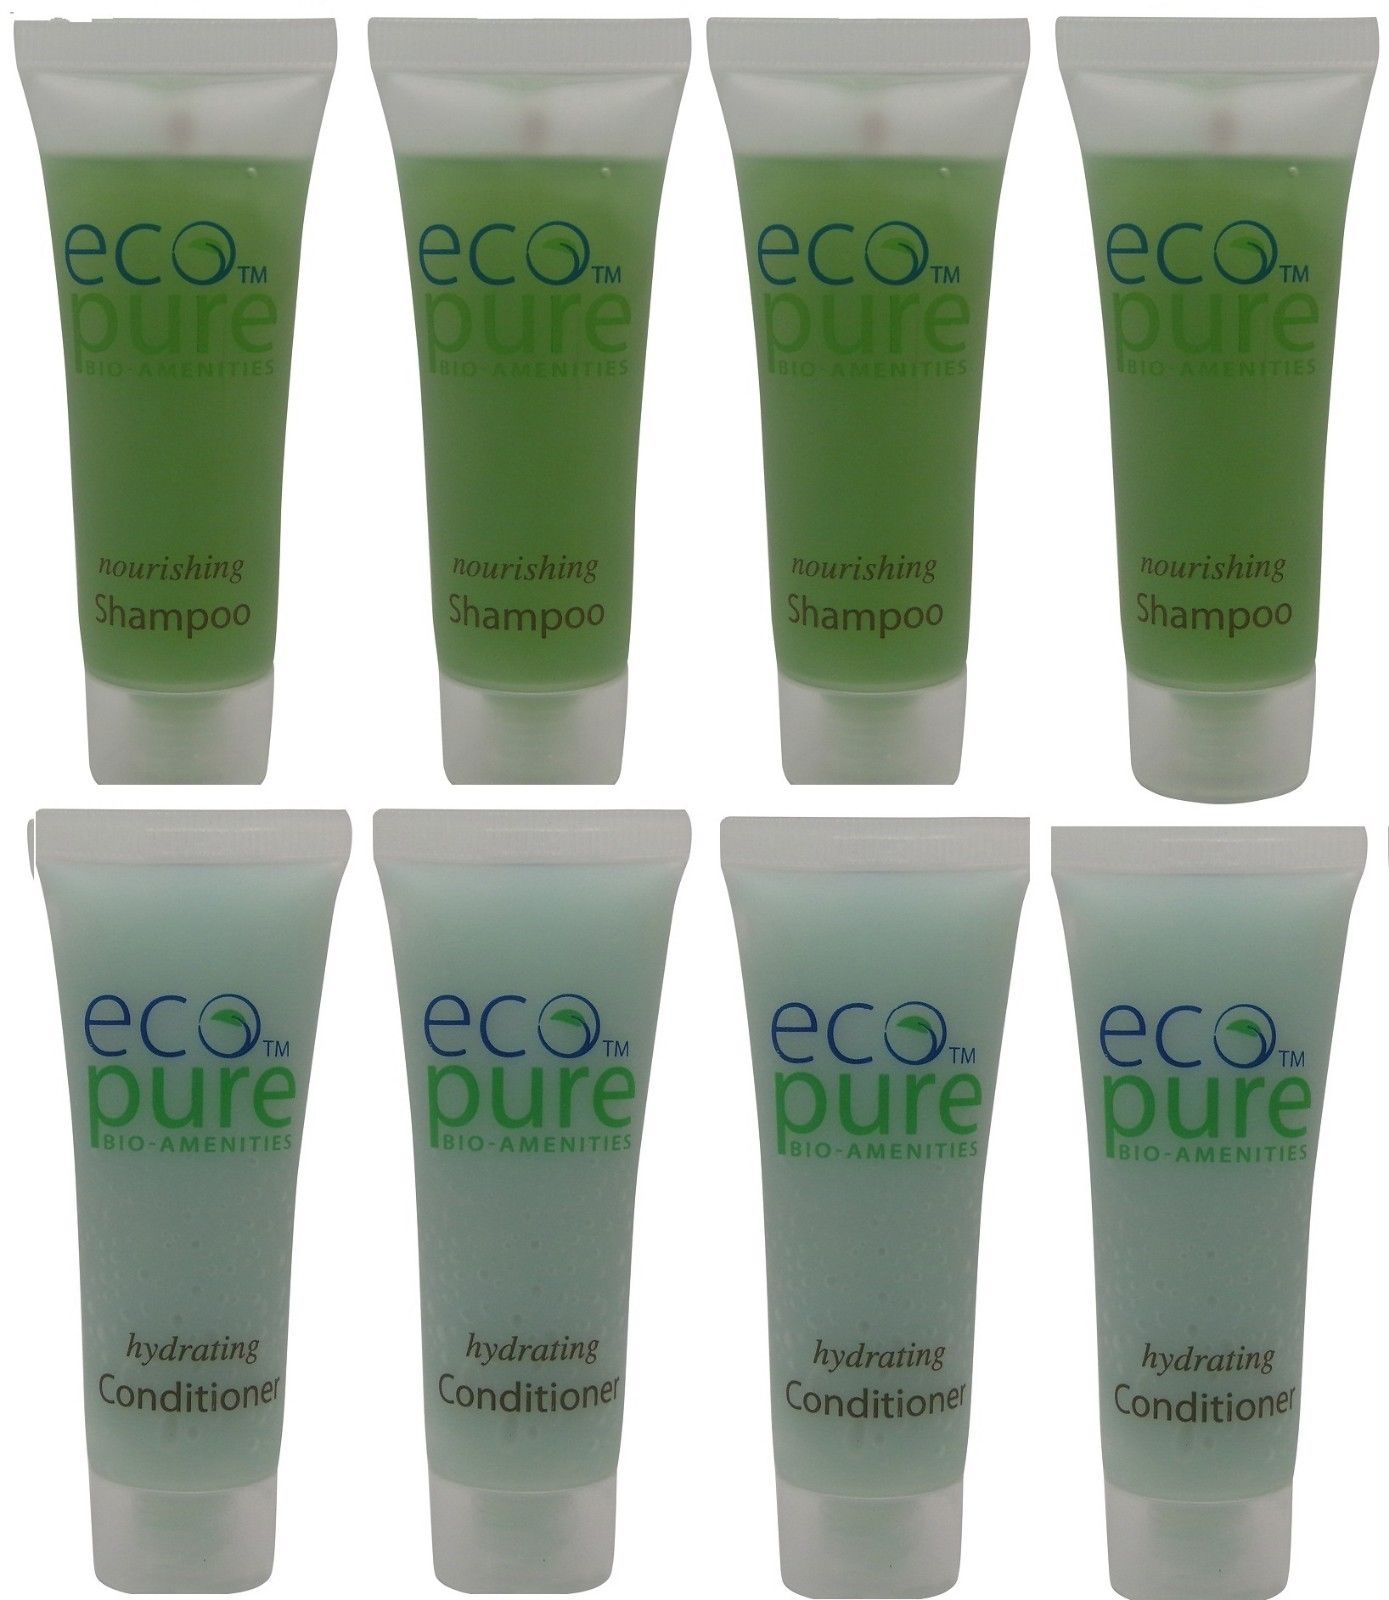 Eco Pure Nourishing Shampoo and Hydrating Conditioner Lot of 8 (4 of each) 1oz